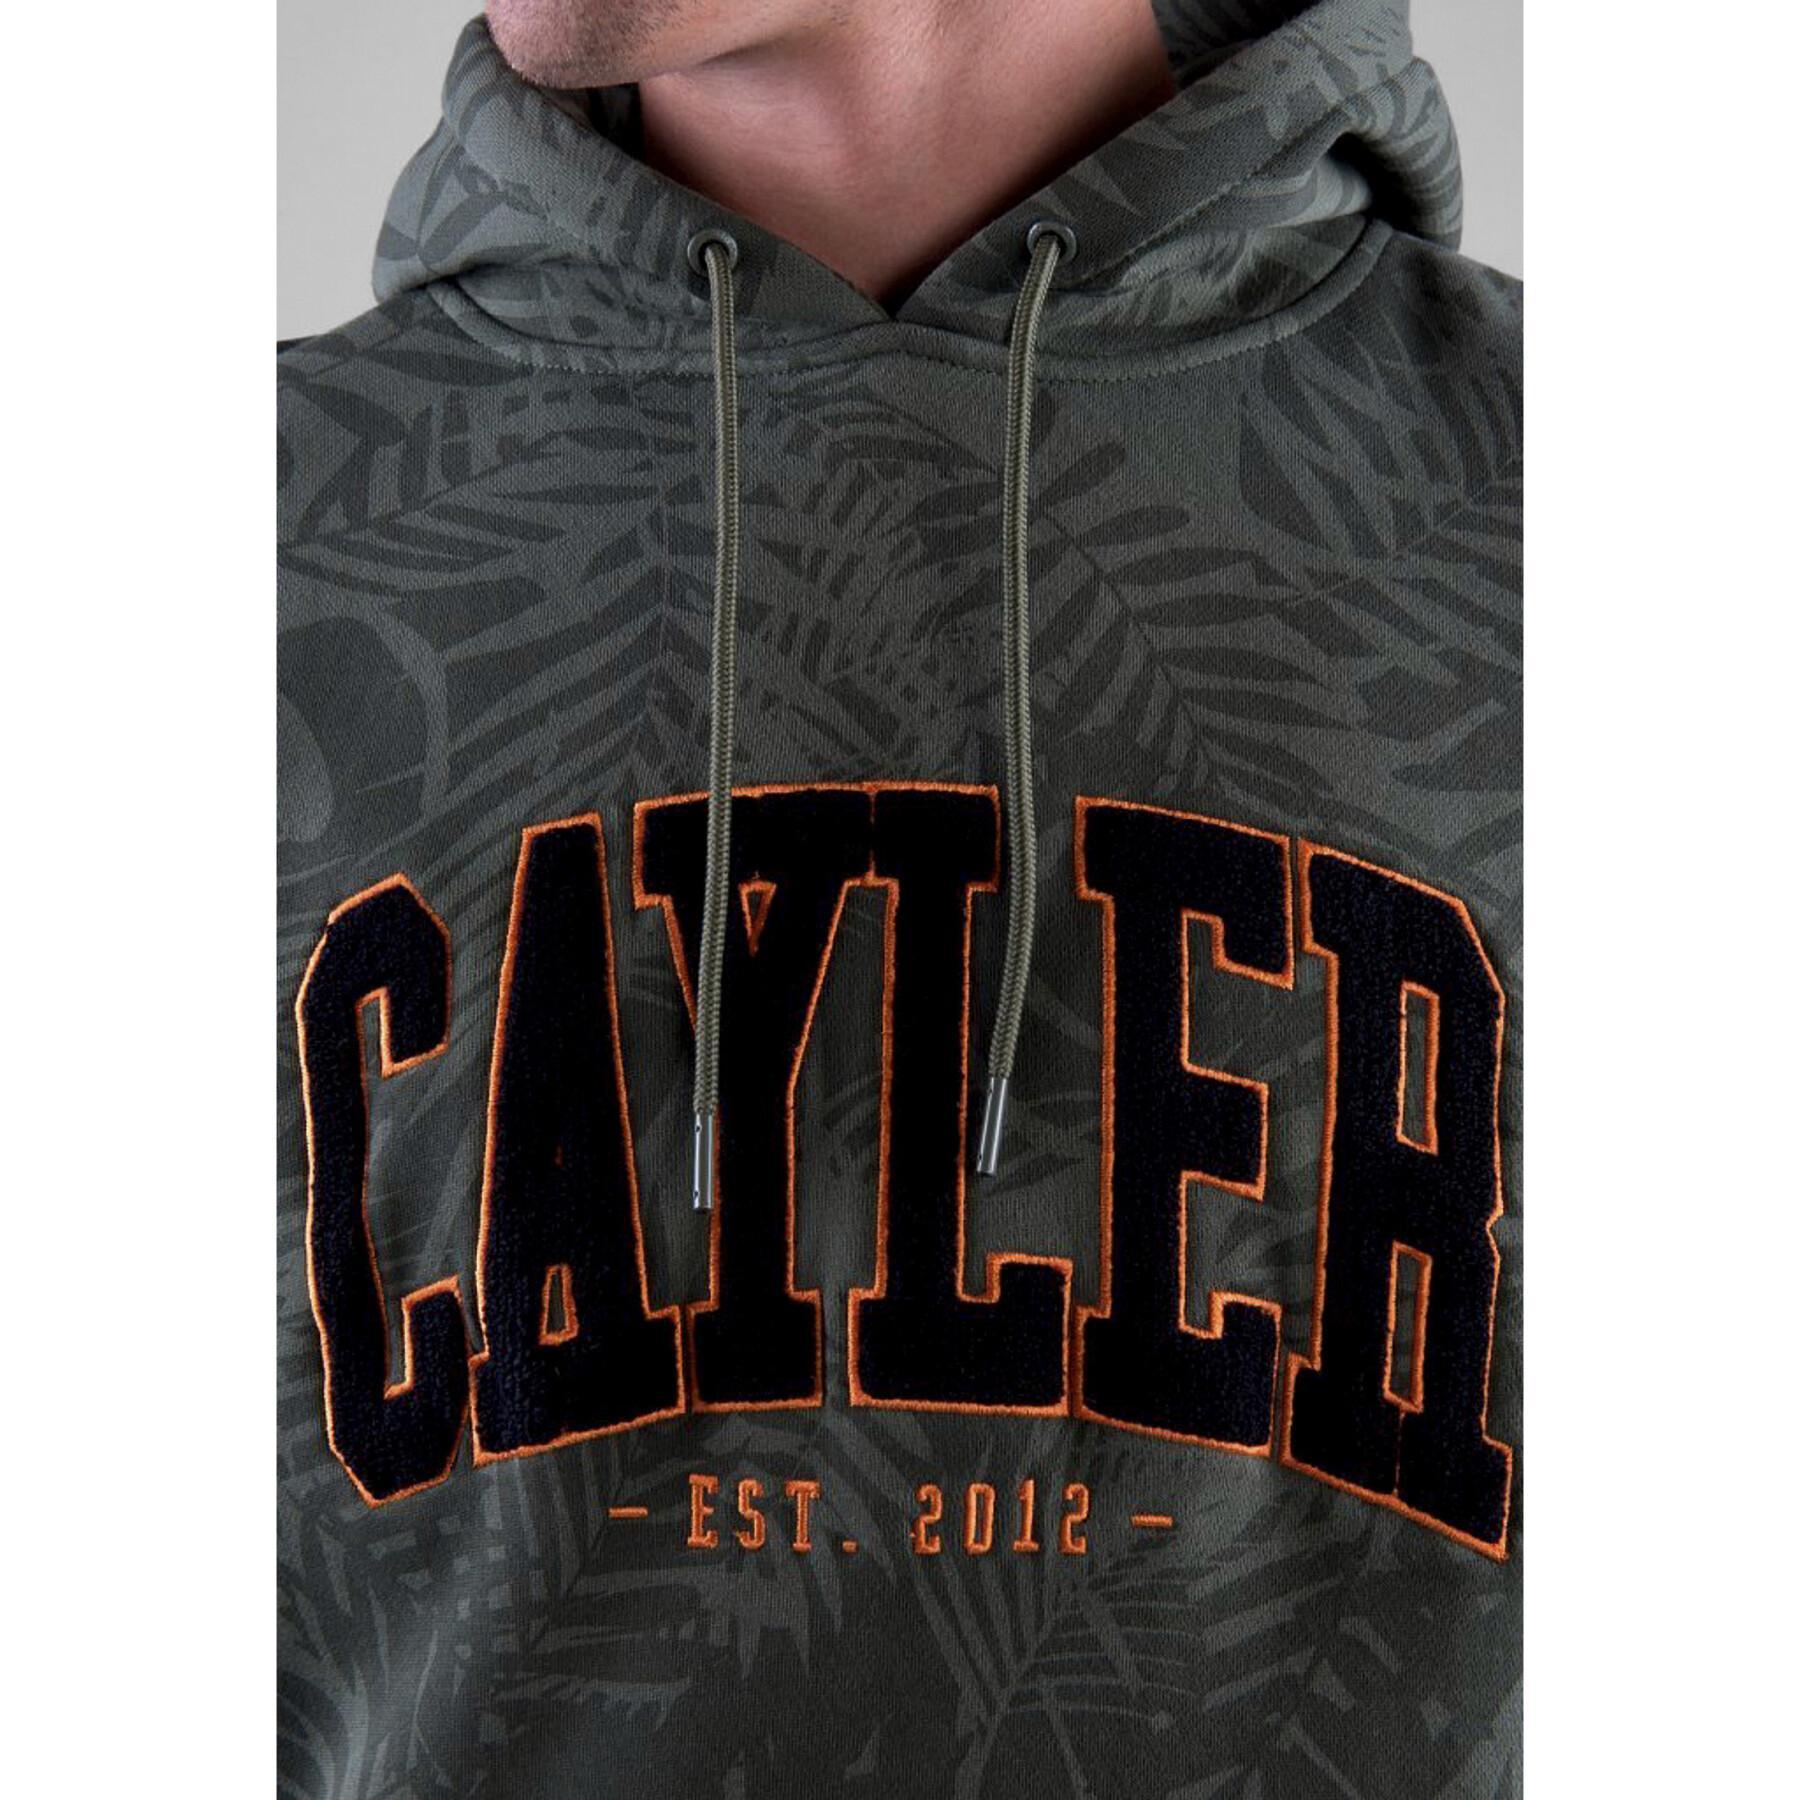 Bluza Cayler & Sons wl palmouflage